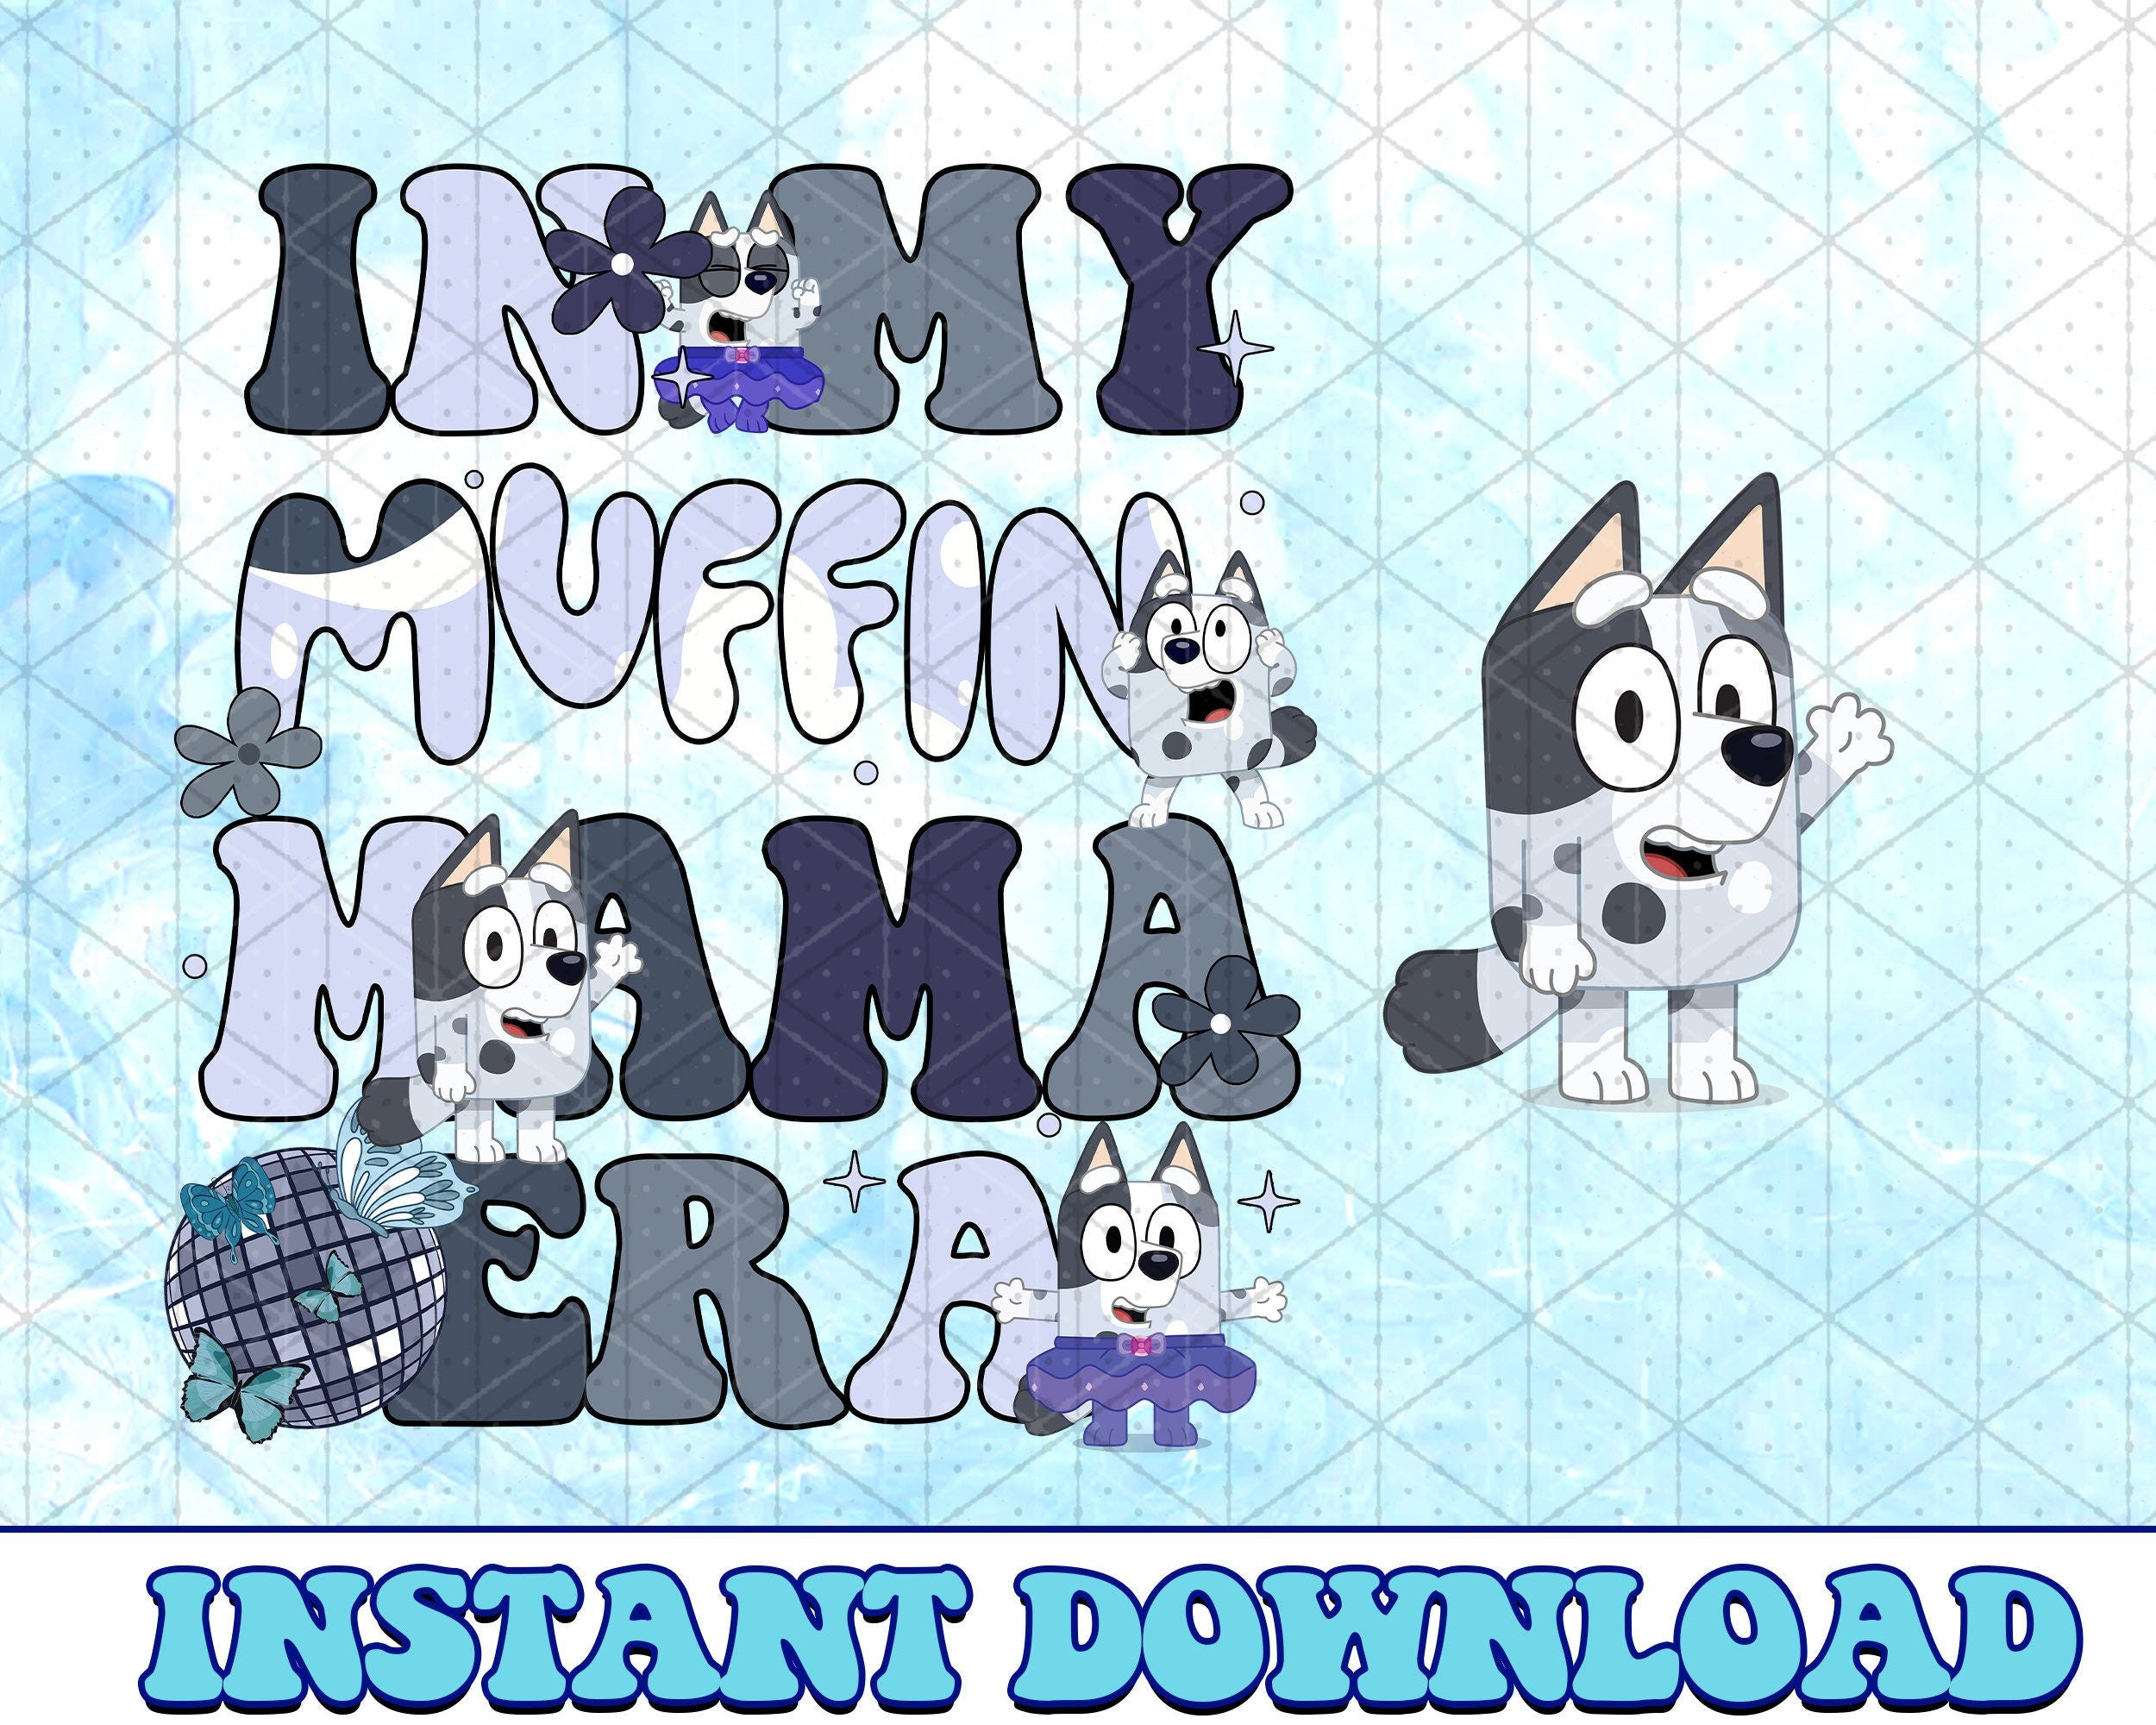 In My Muffin Mama Era PNG, Bluey Family PNG, Bluey The Eras Tour Png, Bluey Bingo Png, Bluey Mom Png, Bluey Dad Png, Bluey Friends Png